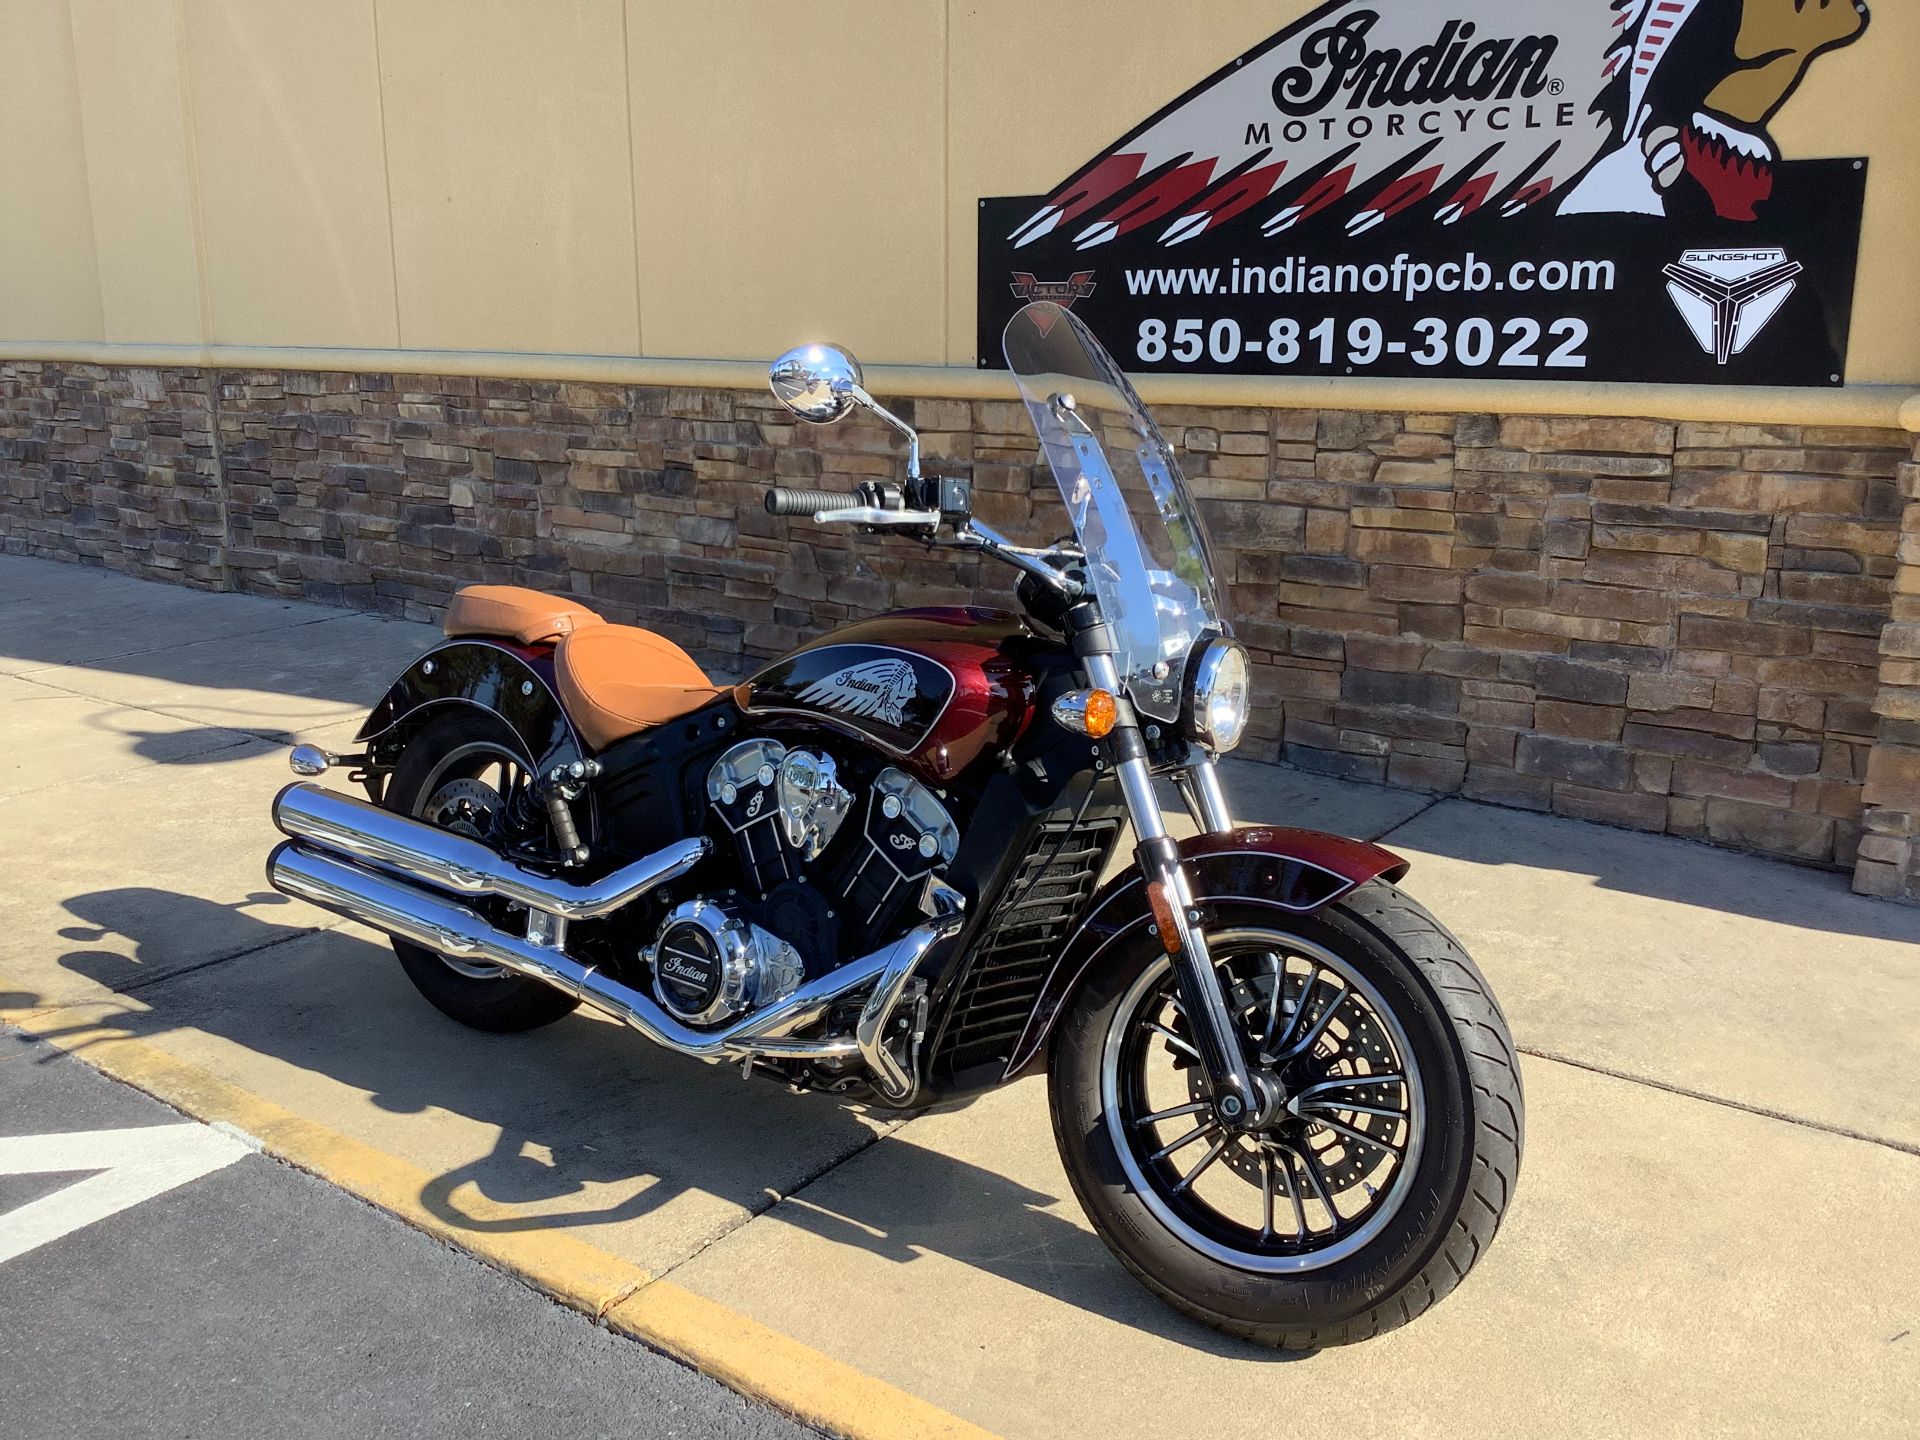 2021 Indian Motorcycle SCOUT ABS TWO TONE in Panama City Beach, Florida - Photo 2